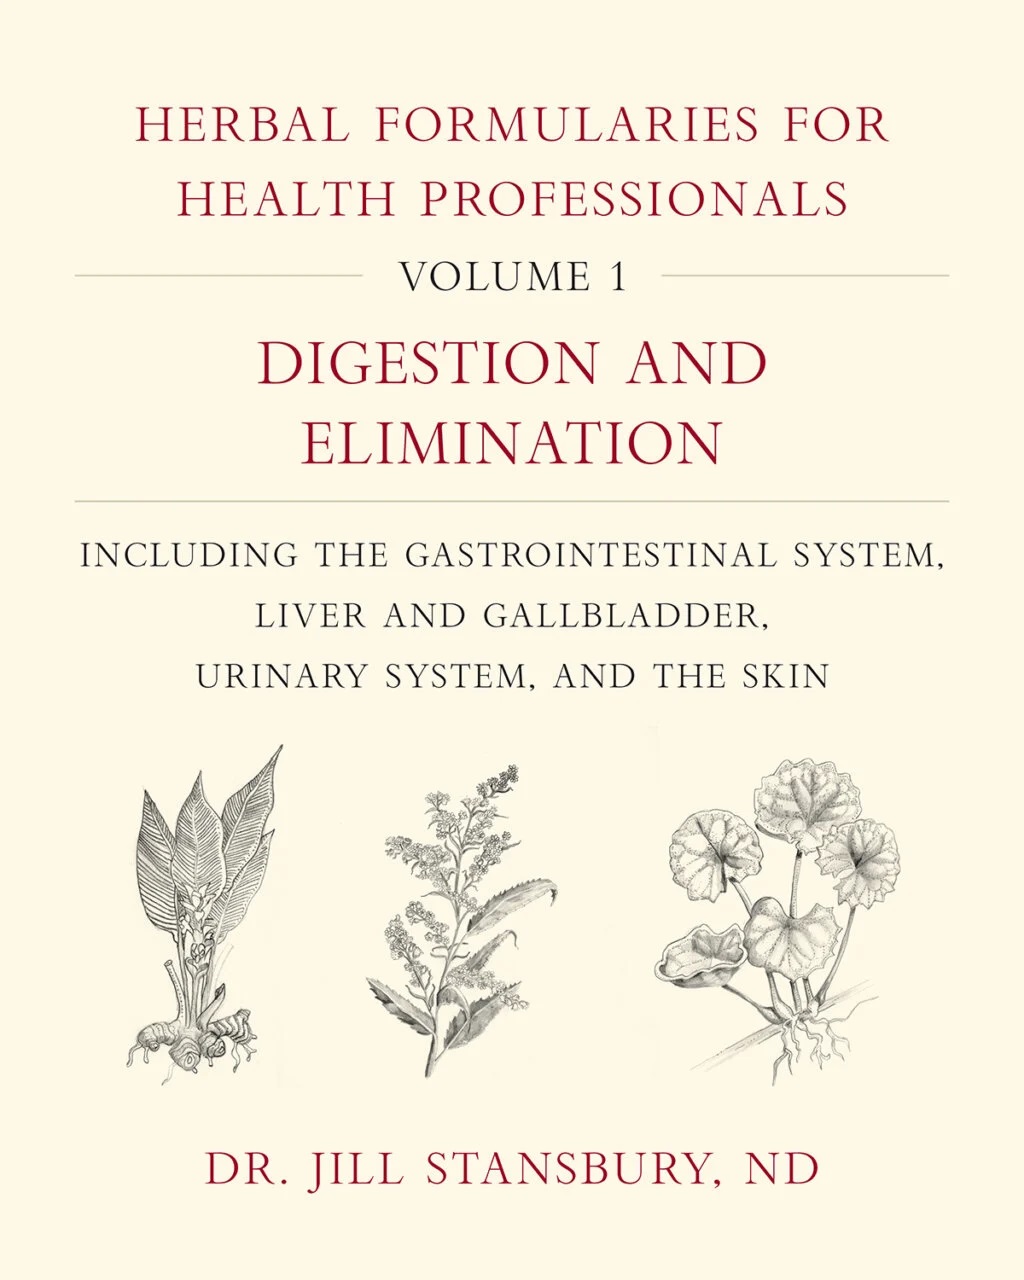 Herbal Formularies for Health Professionals, Volume 1:  Digestion and Elimination